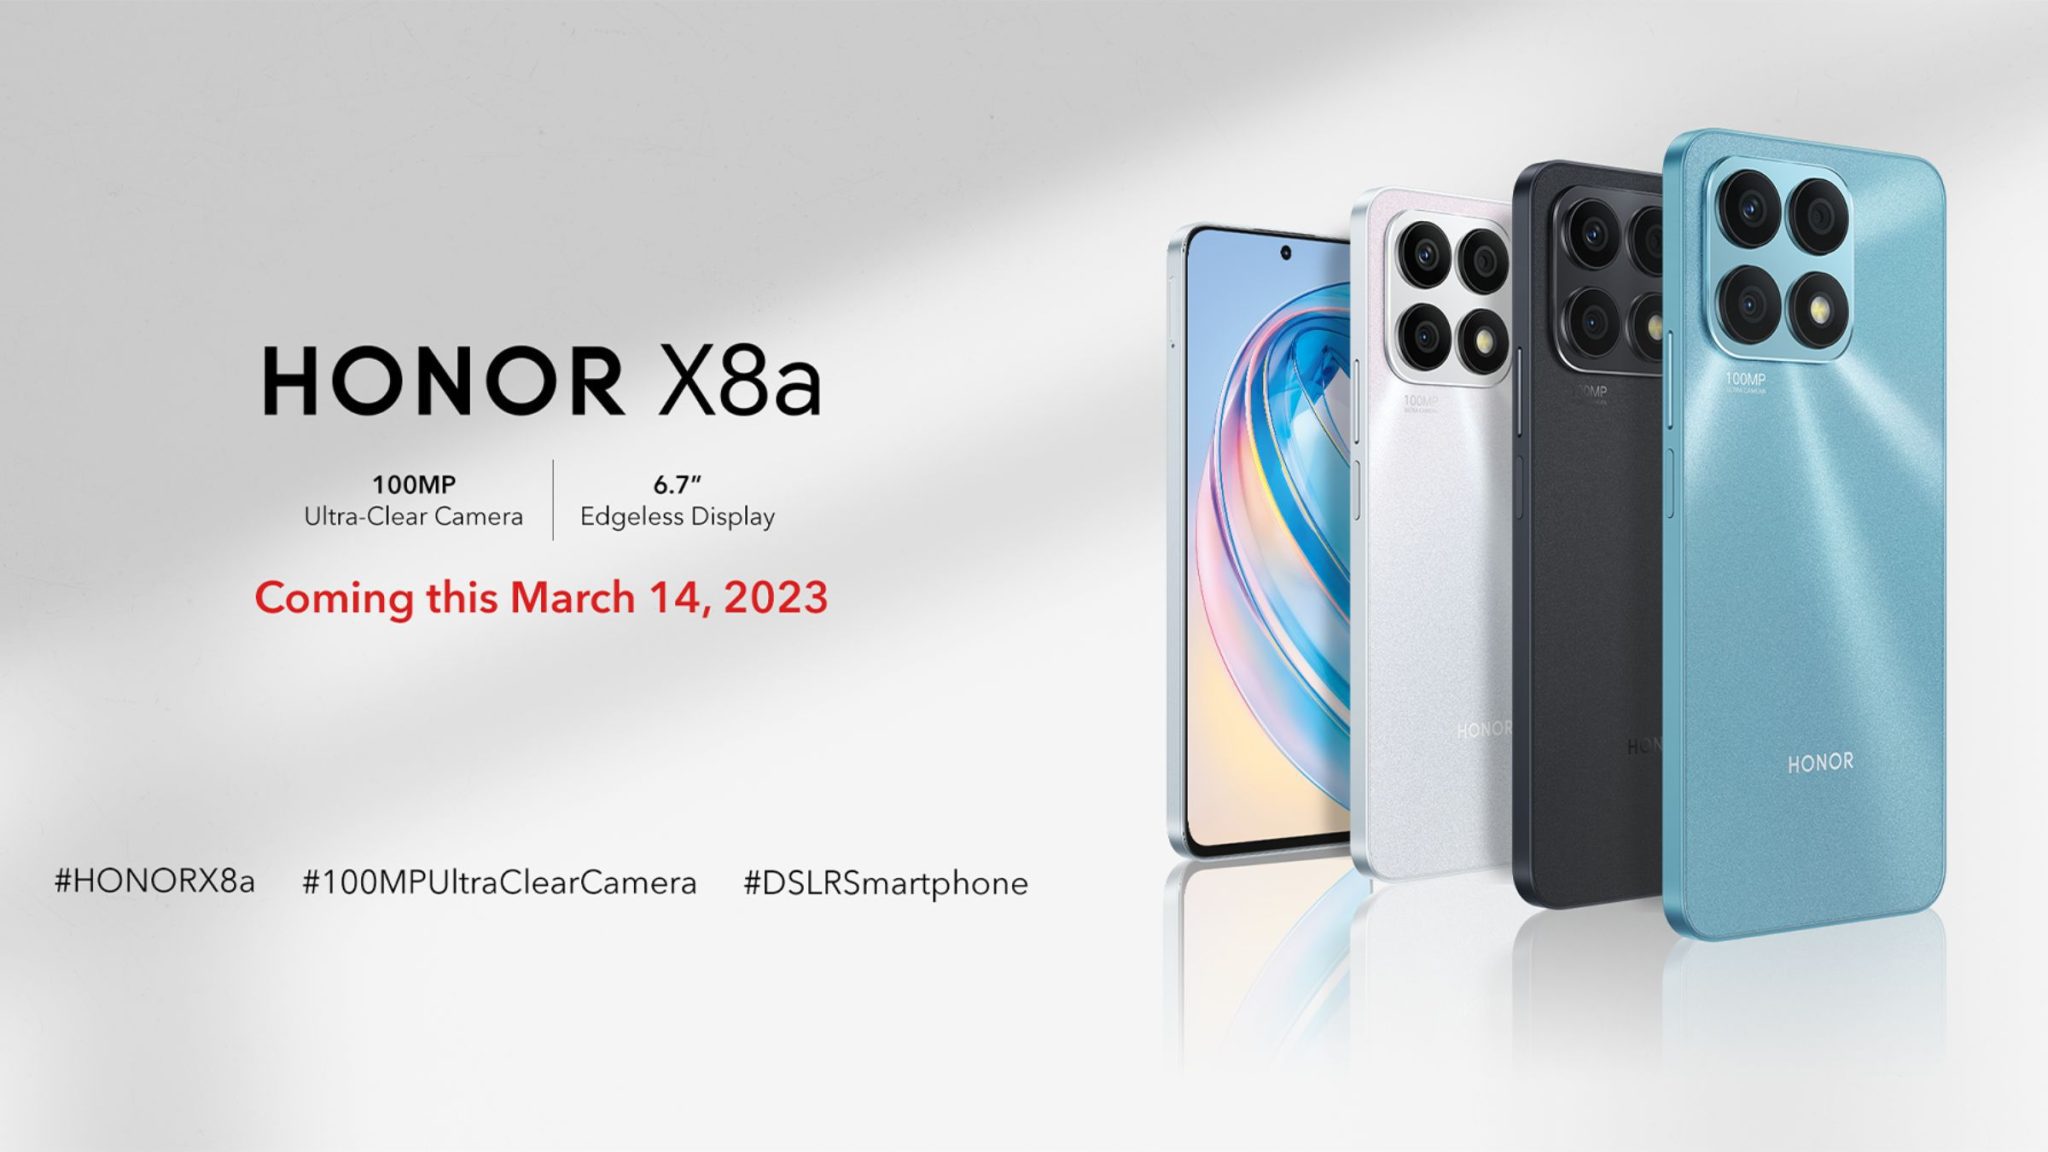 HONOR X8a Coming To PH Header